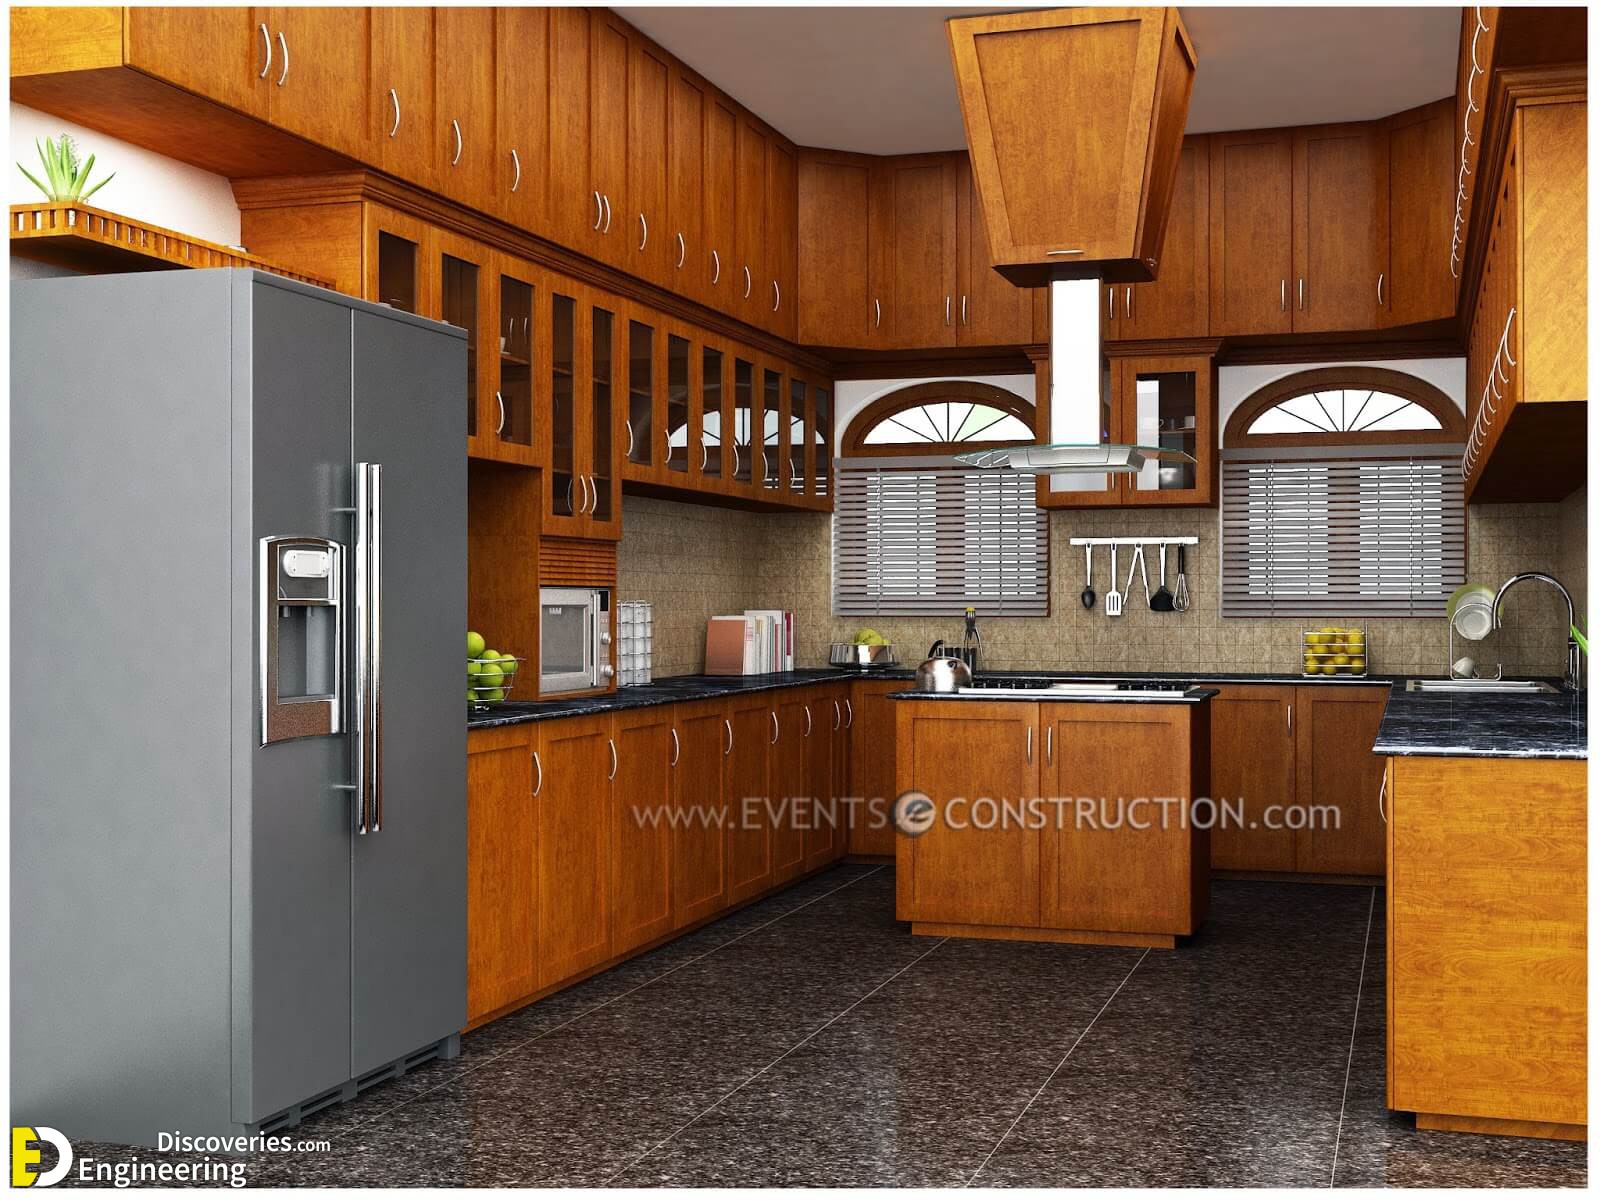 Modular kitchen by Kerala Home Design   Engineering Discoveries